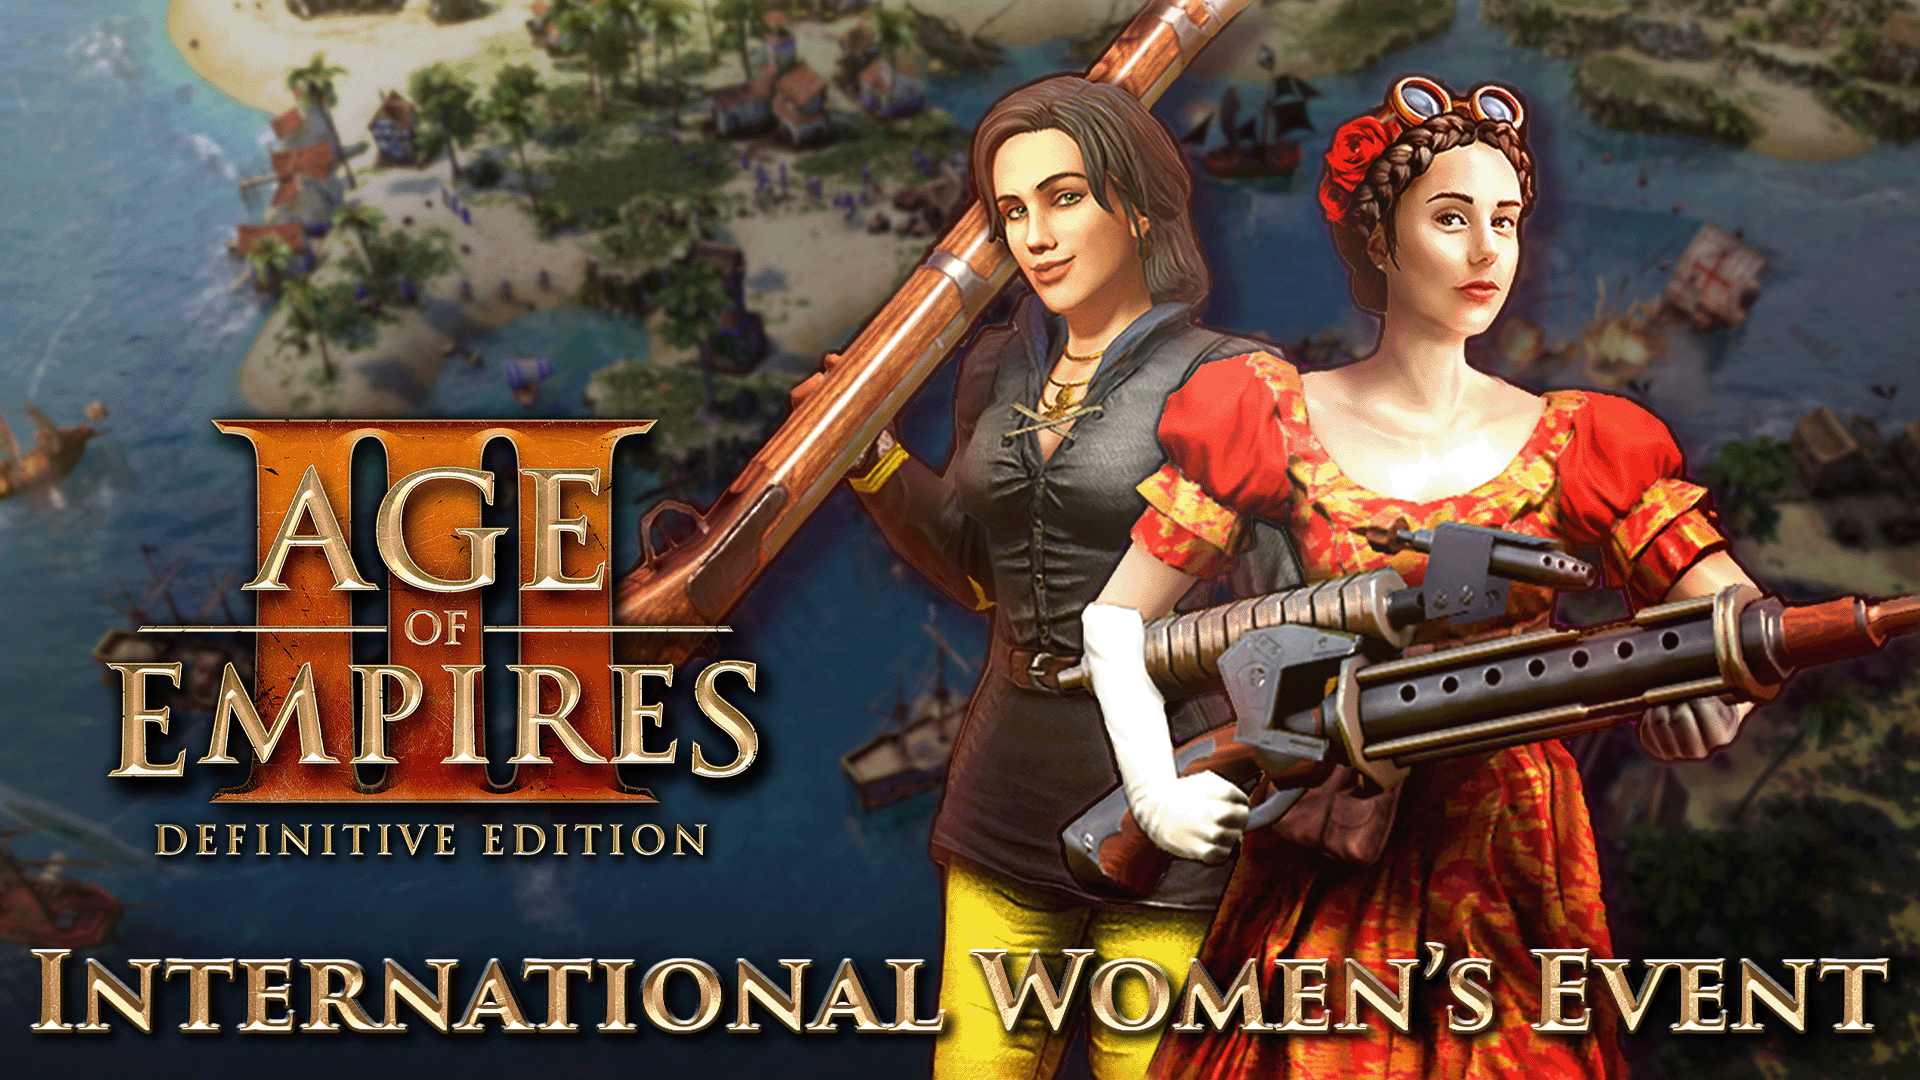 Elizabet Ramsey and Ada Lovelace each holding guns and text that says Age of Empires III Definitive Edition International Women's Event